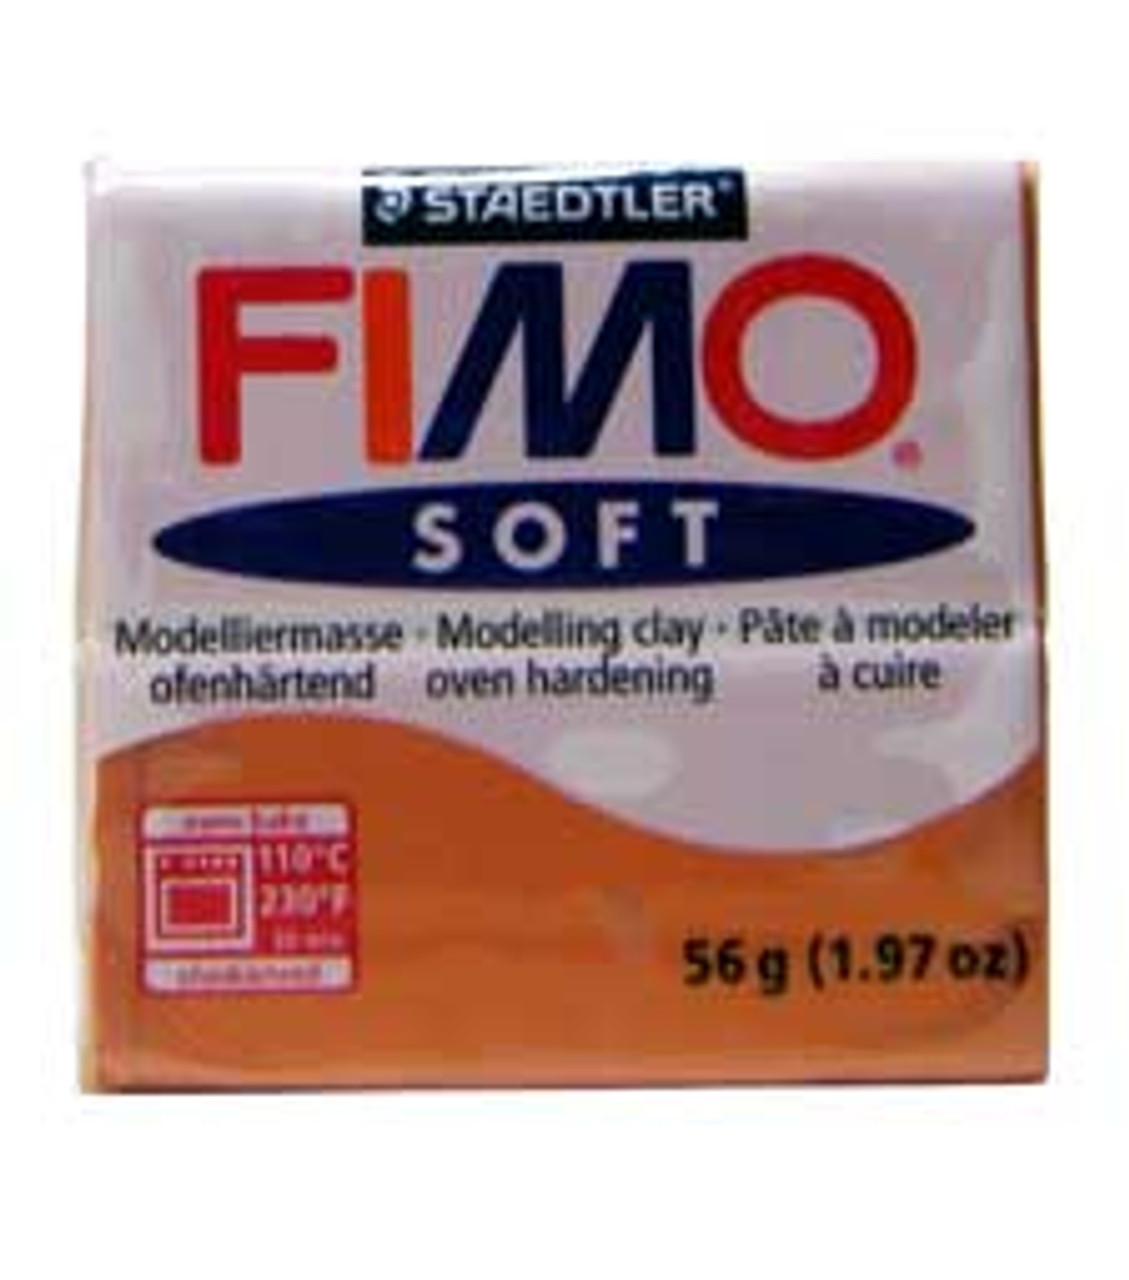 Fimo Soft Polymer Clay - Cognac - Poly Clay Play